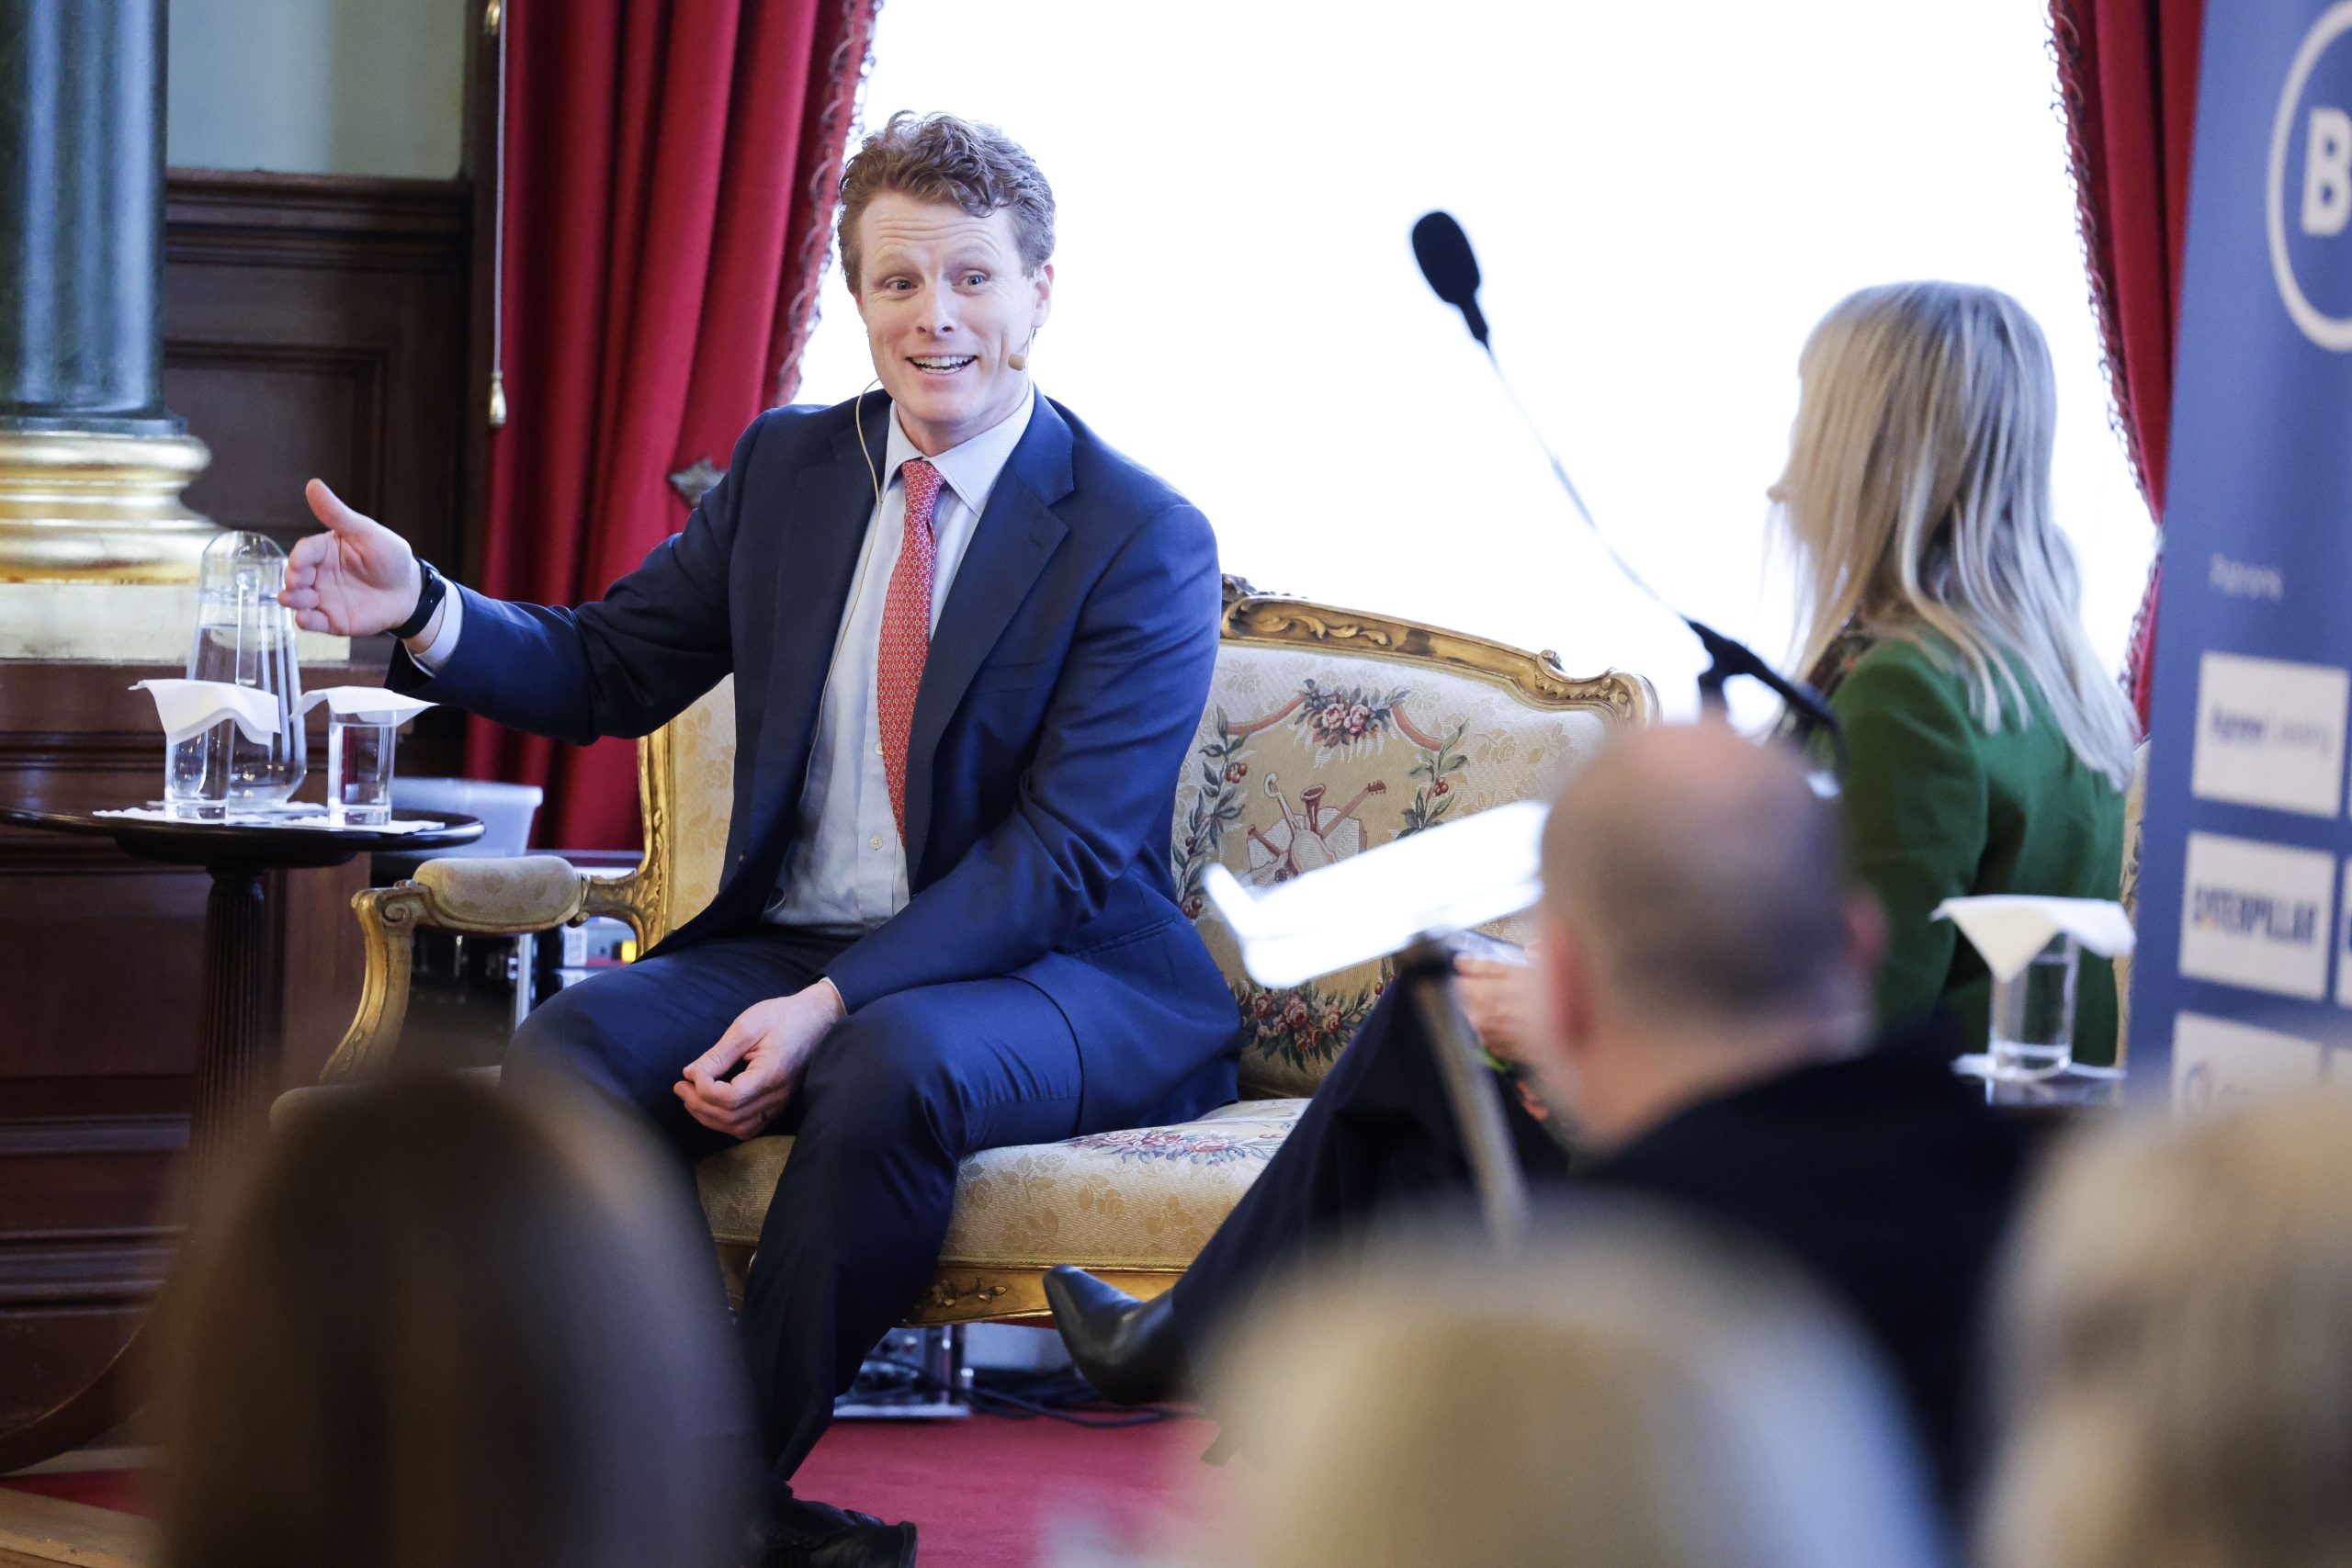 US Special Envoy Joe Kennedy III addresses NI Chamber members at business event